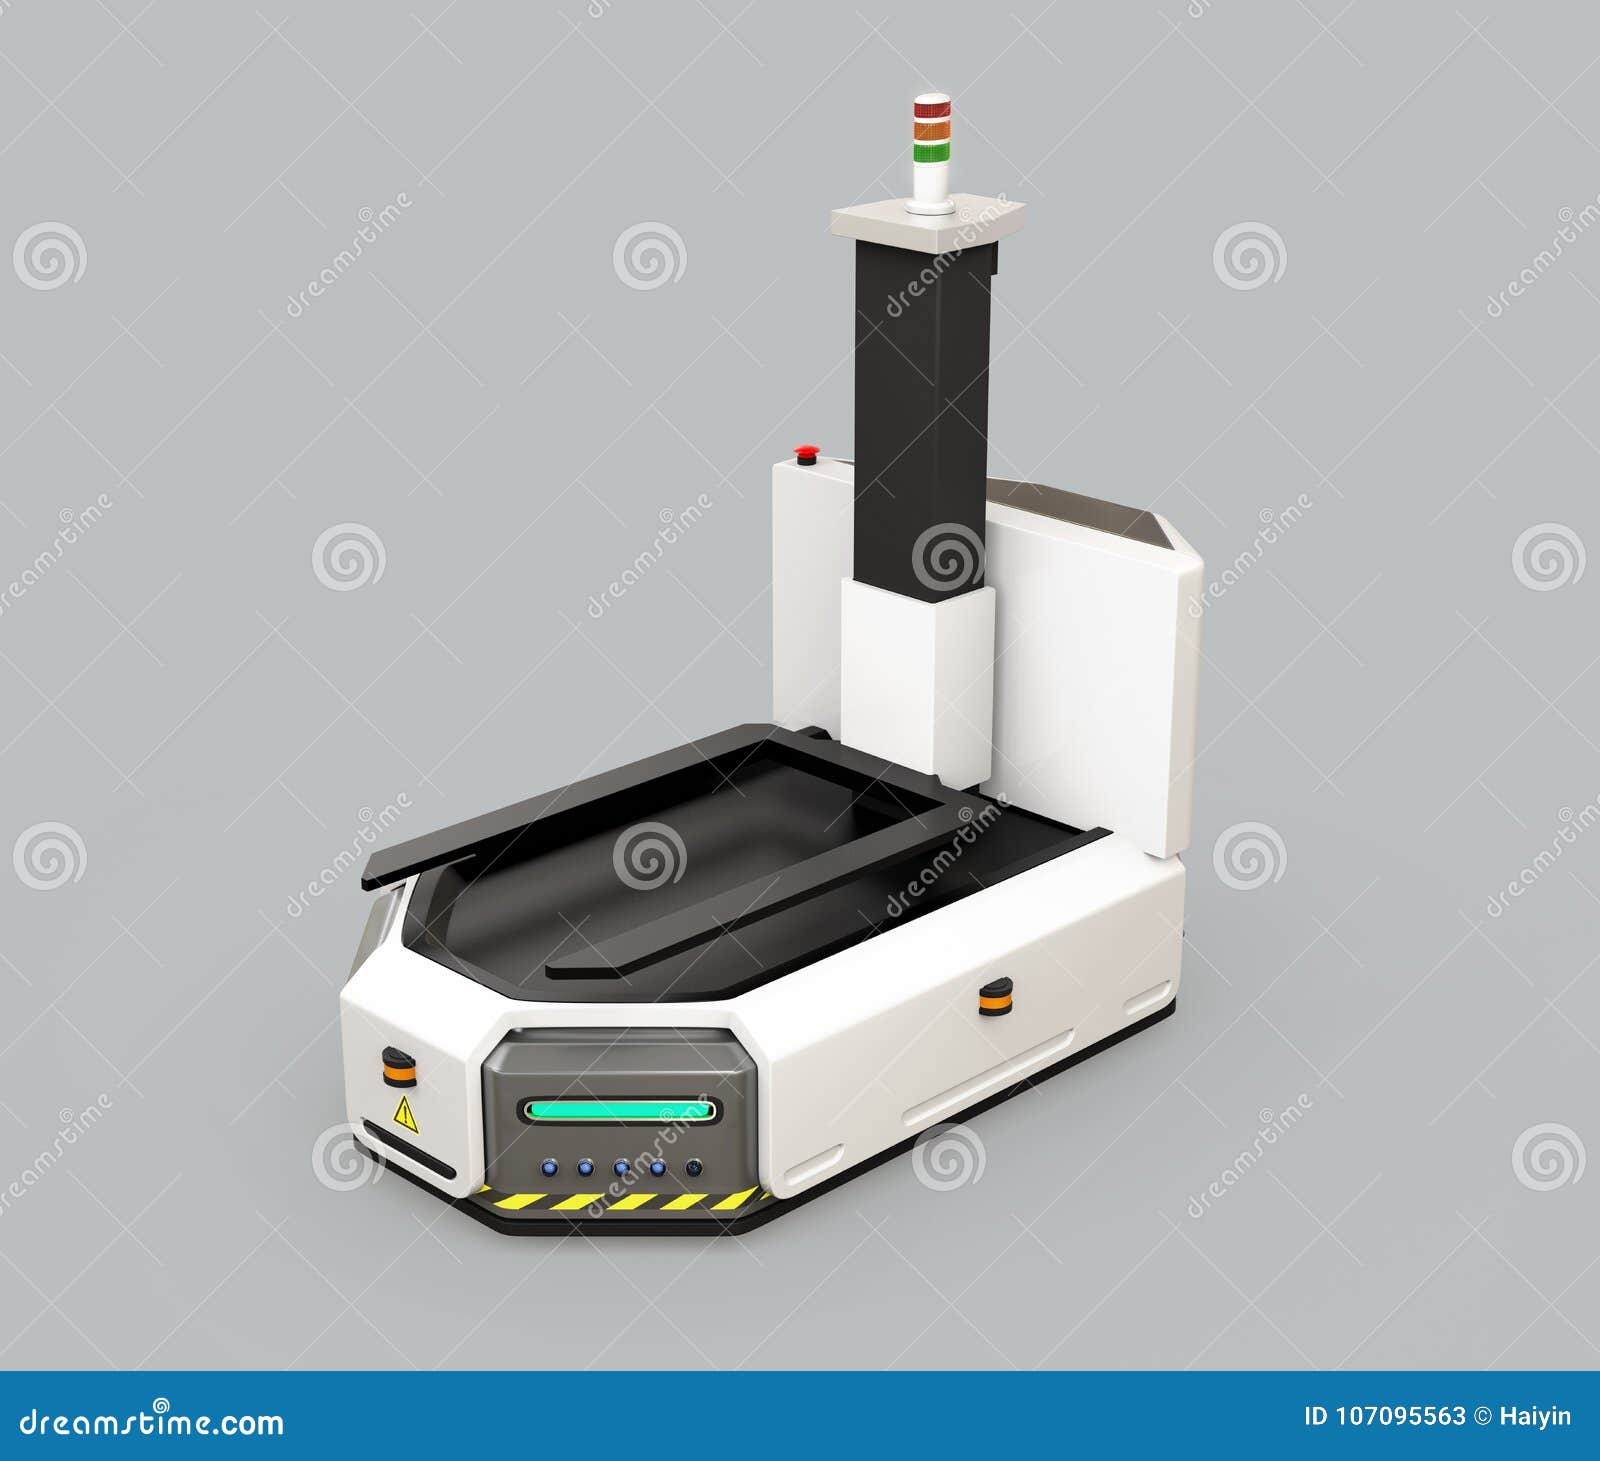 self driving agv with forklift on gray background